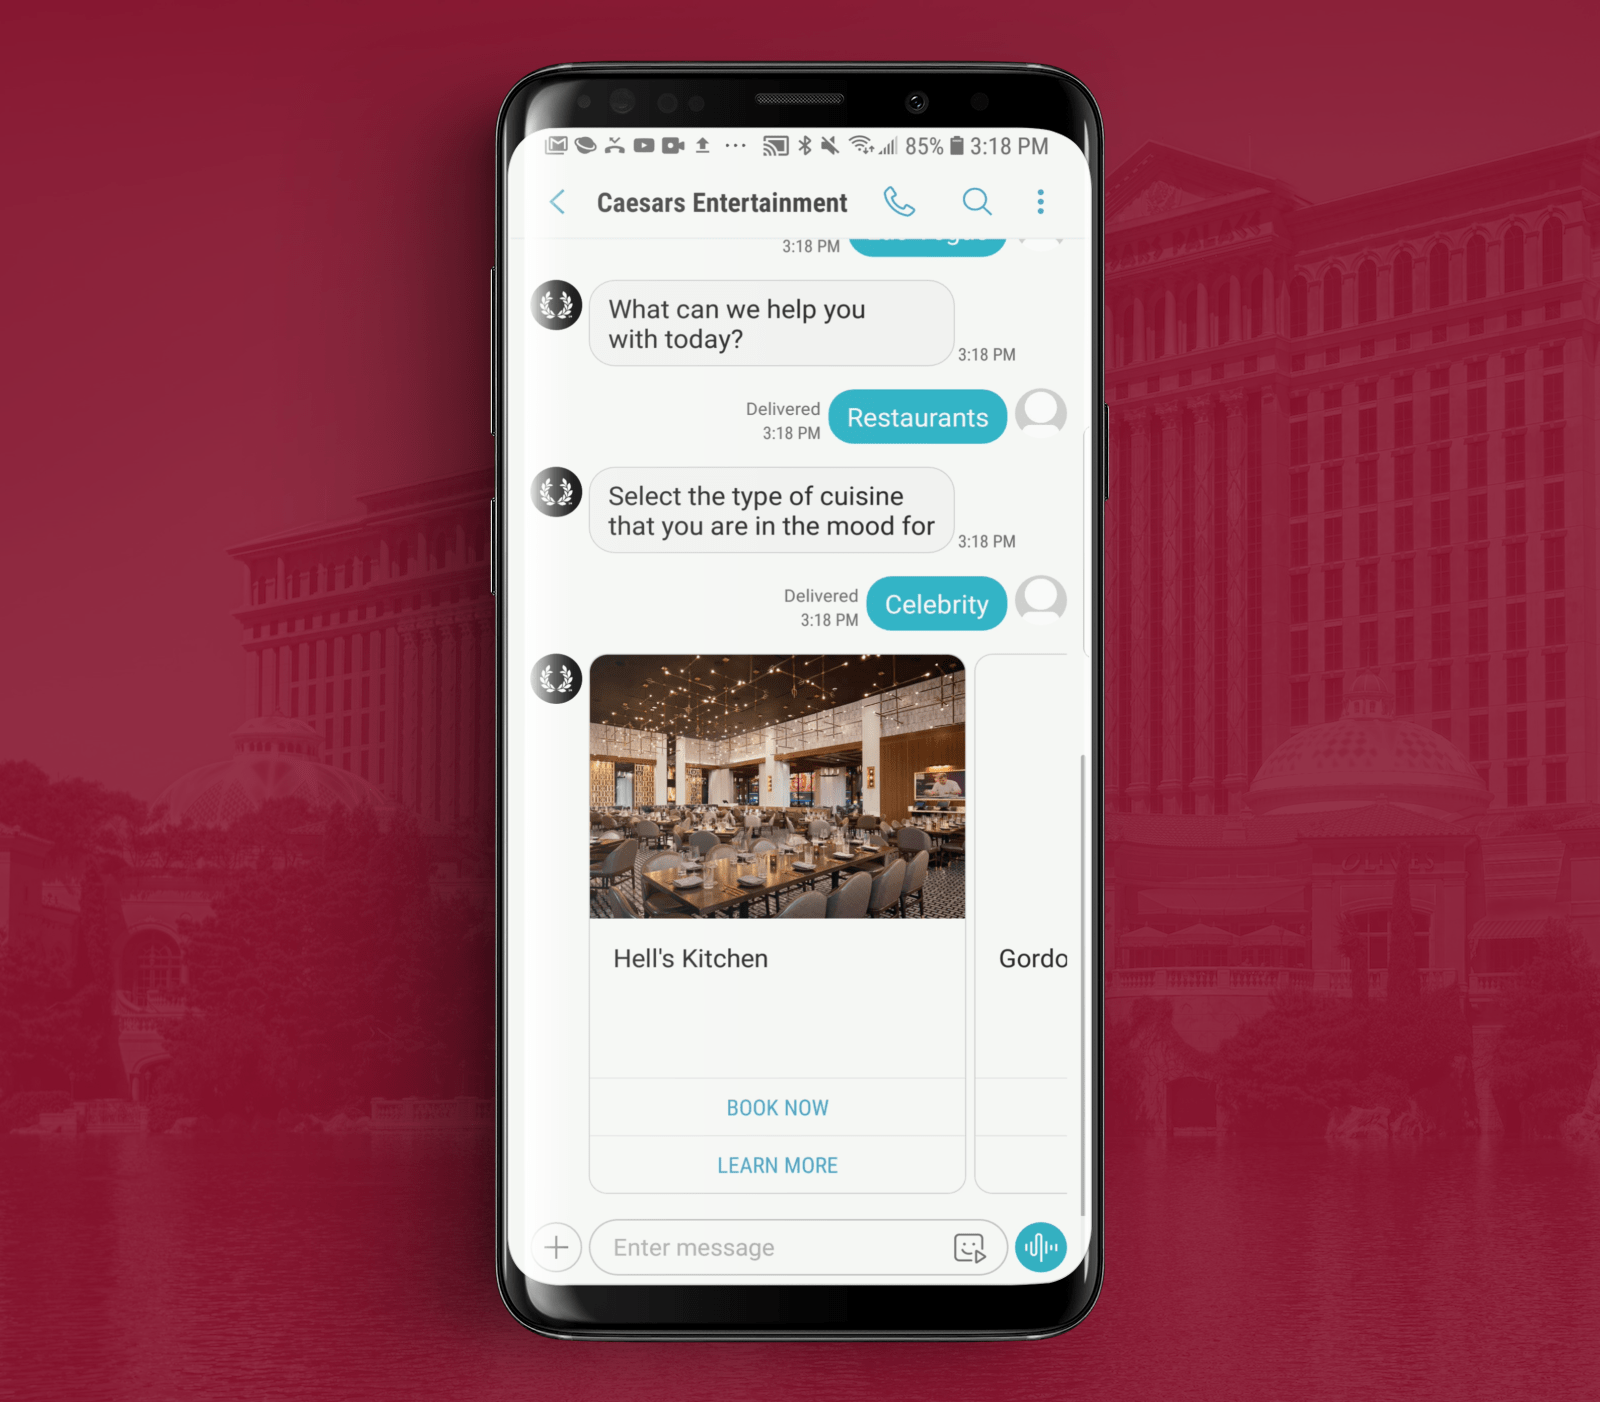 RCS Business Messaging Example from Caesars Entertainment 4